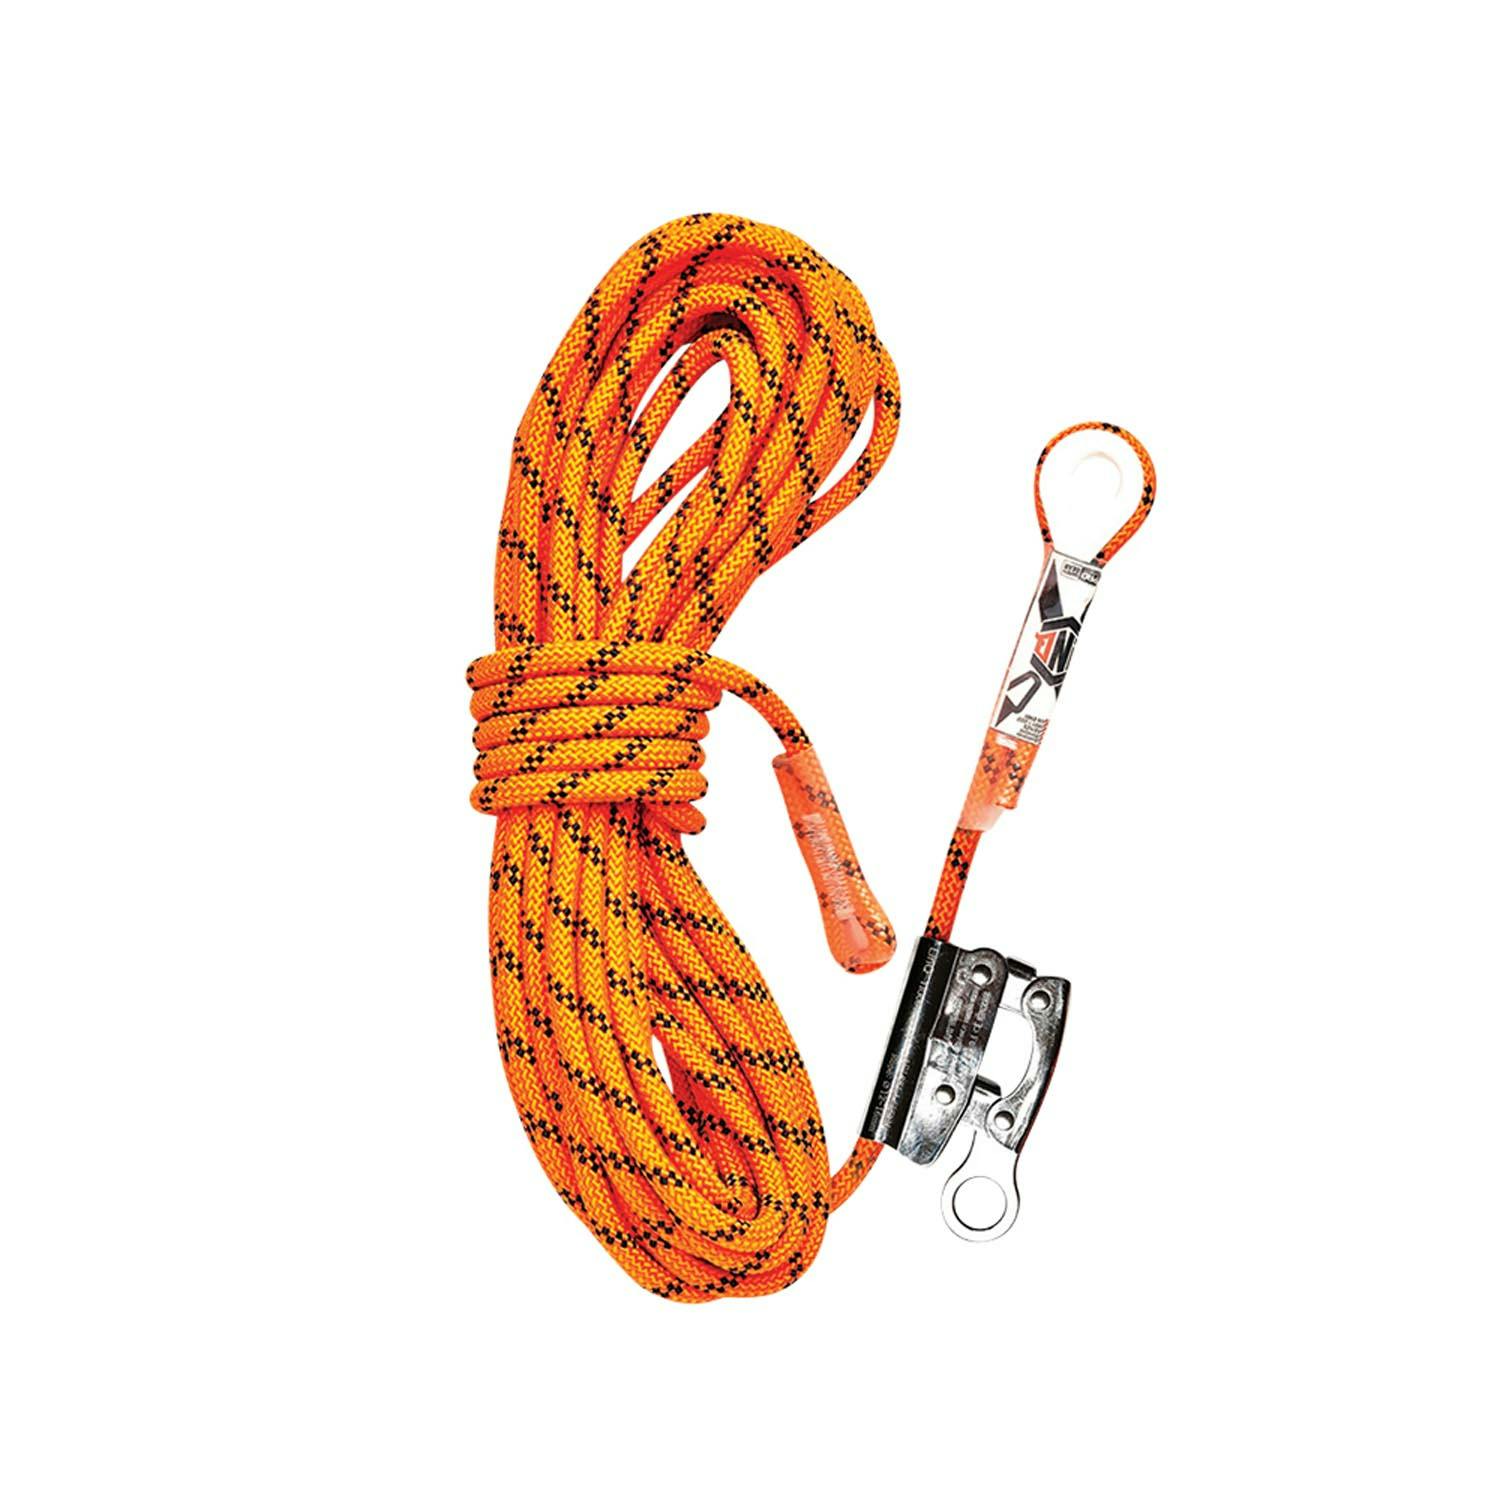 LINQ Kernmantle Rope With Thimble Eye & Rope Grab_1